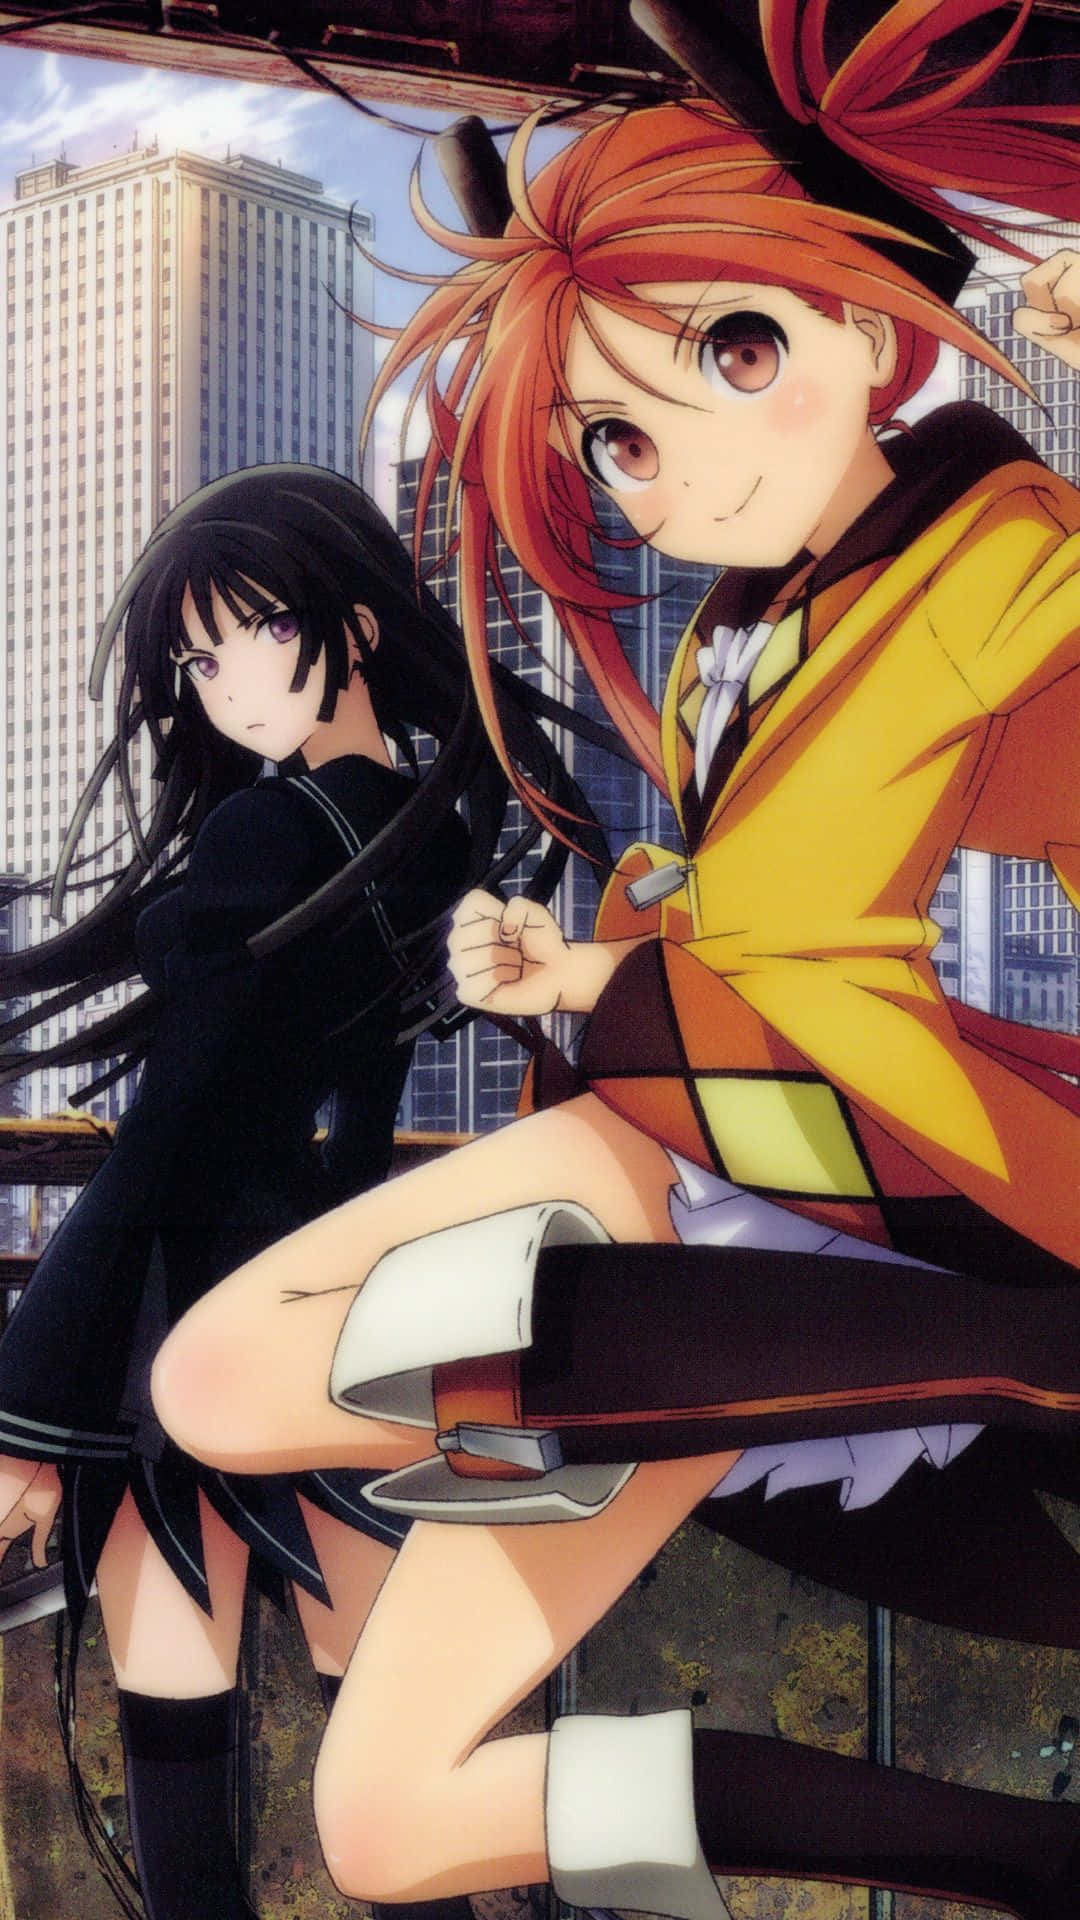 Two Anime Girls In Black And Yellow Standing On A Balcony